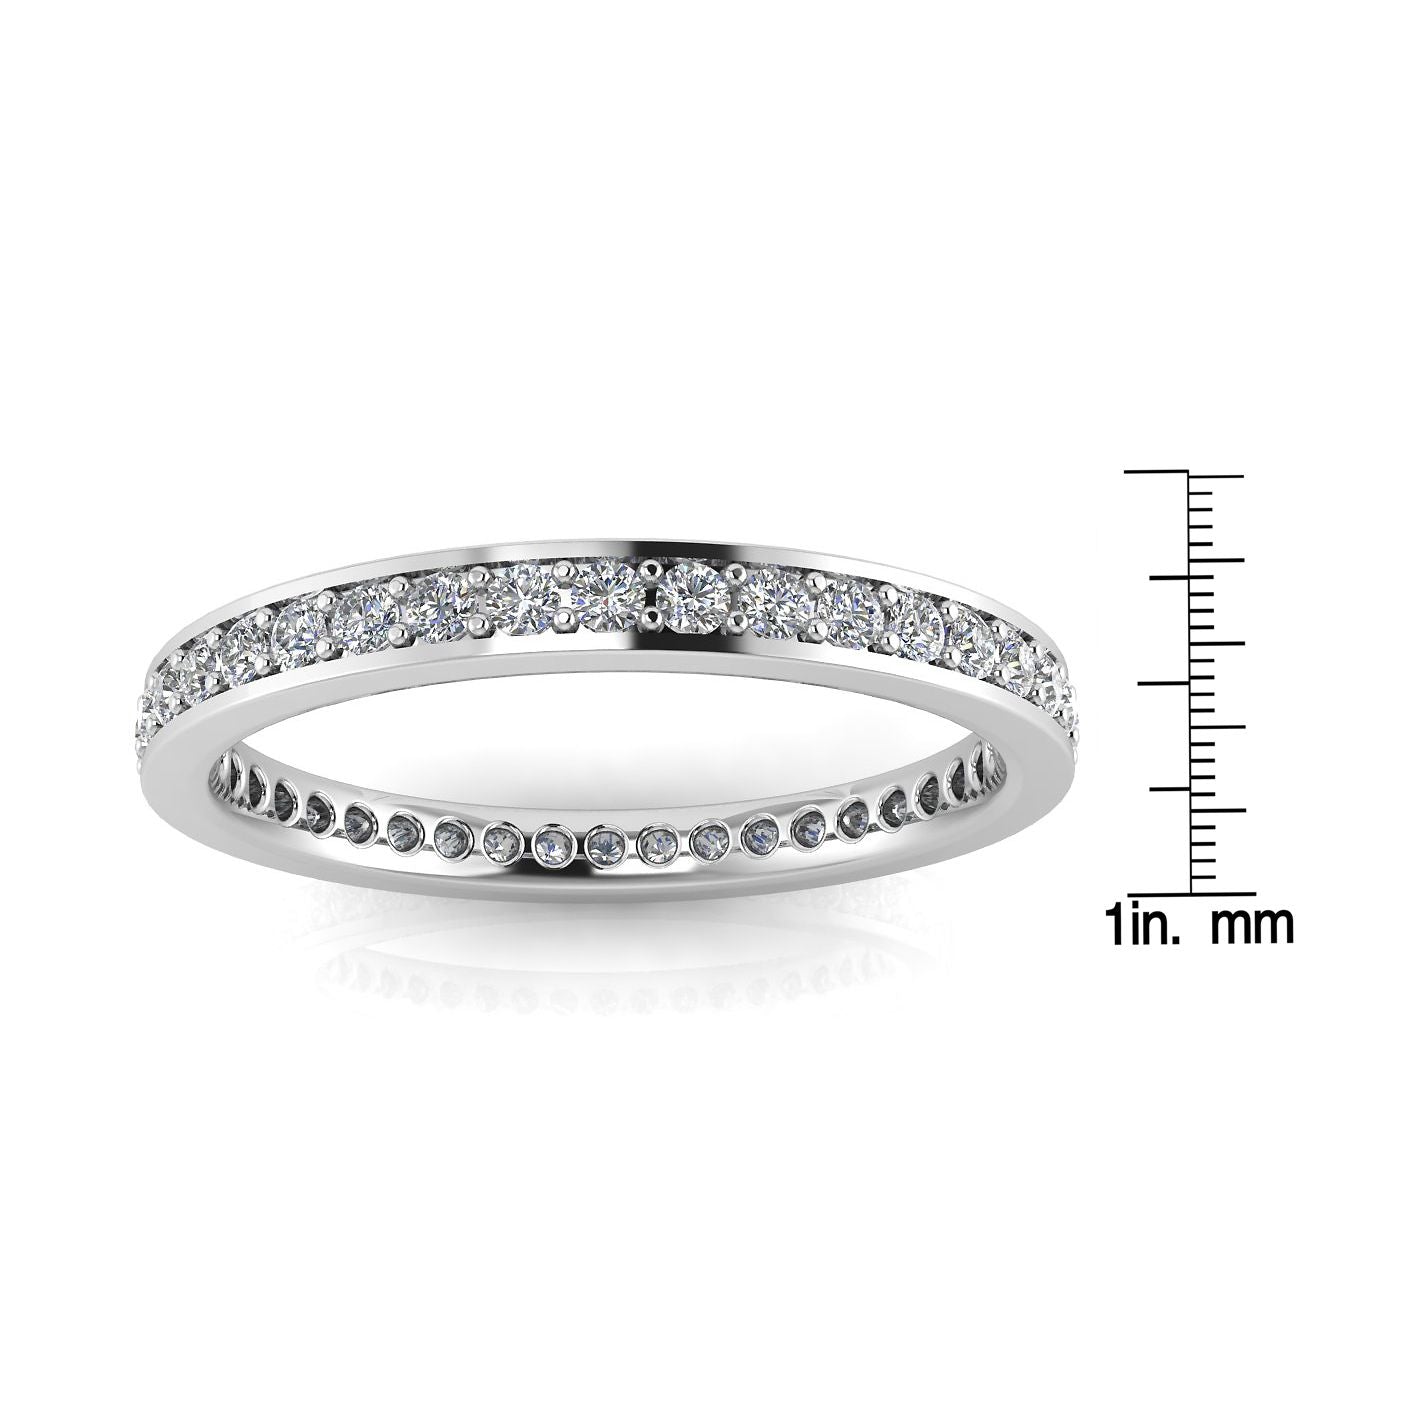 Round Brilliant Cut Diamond Channel Pave Set Eternity Ring In 18k White Gold  (0.83ct. Tw.) Ring Size 4